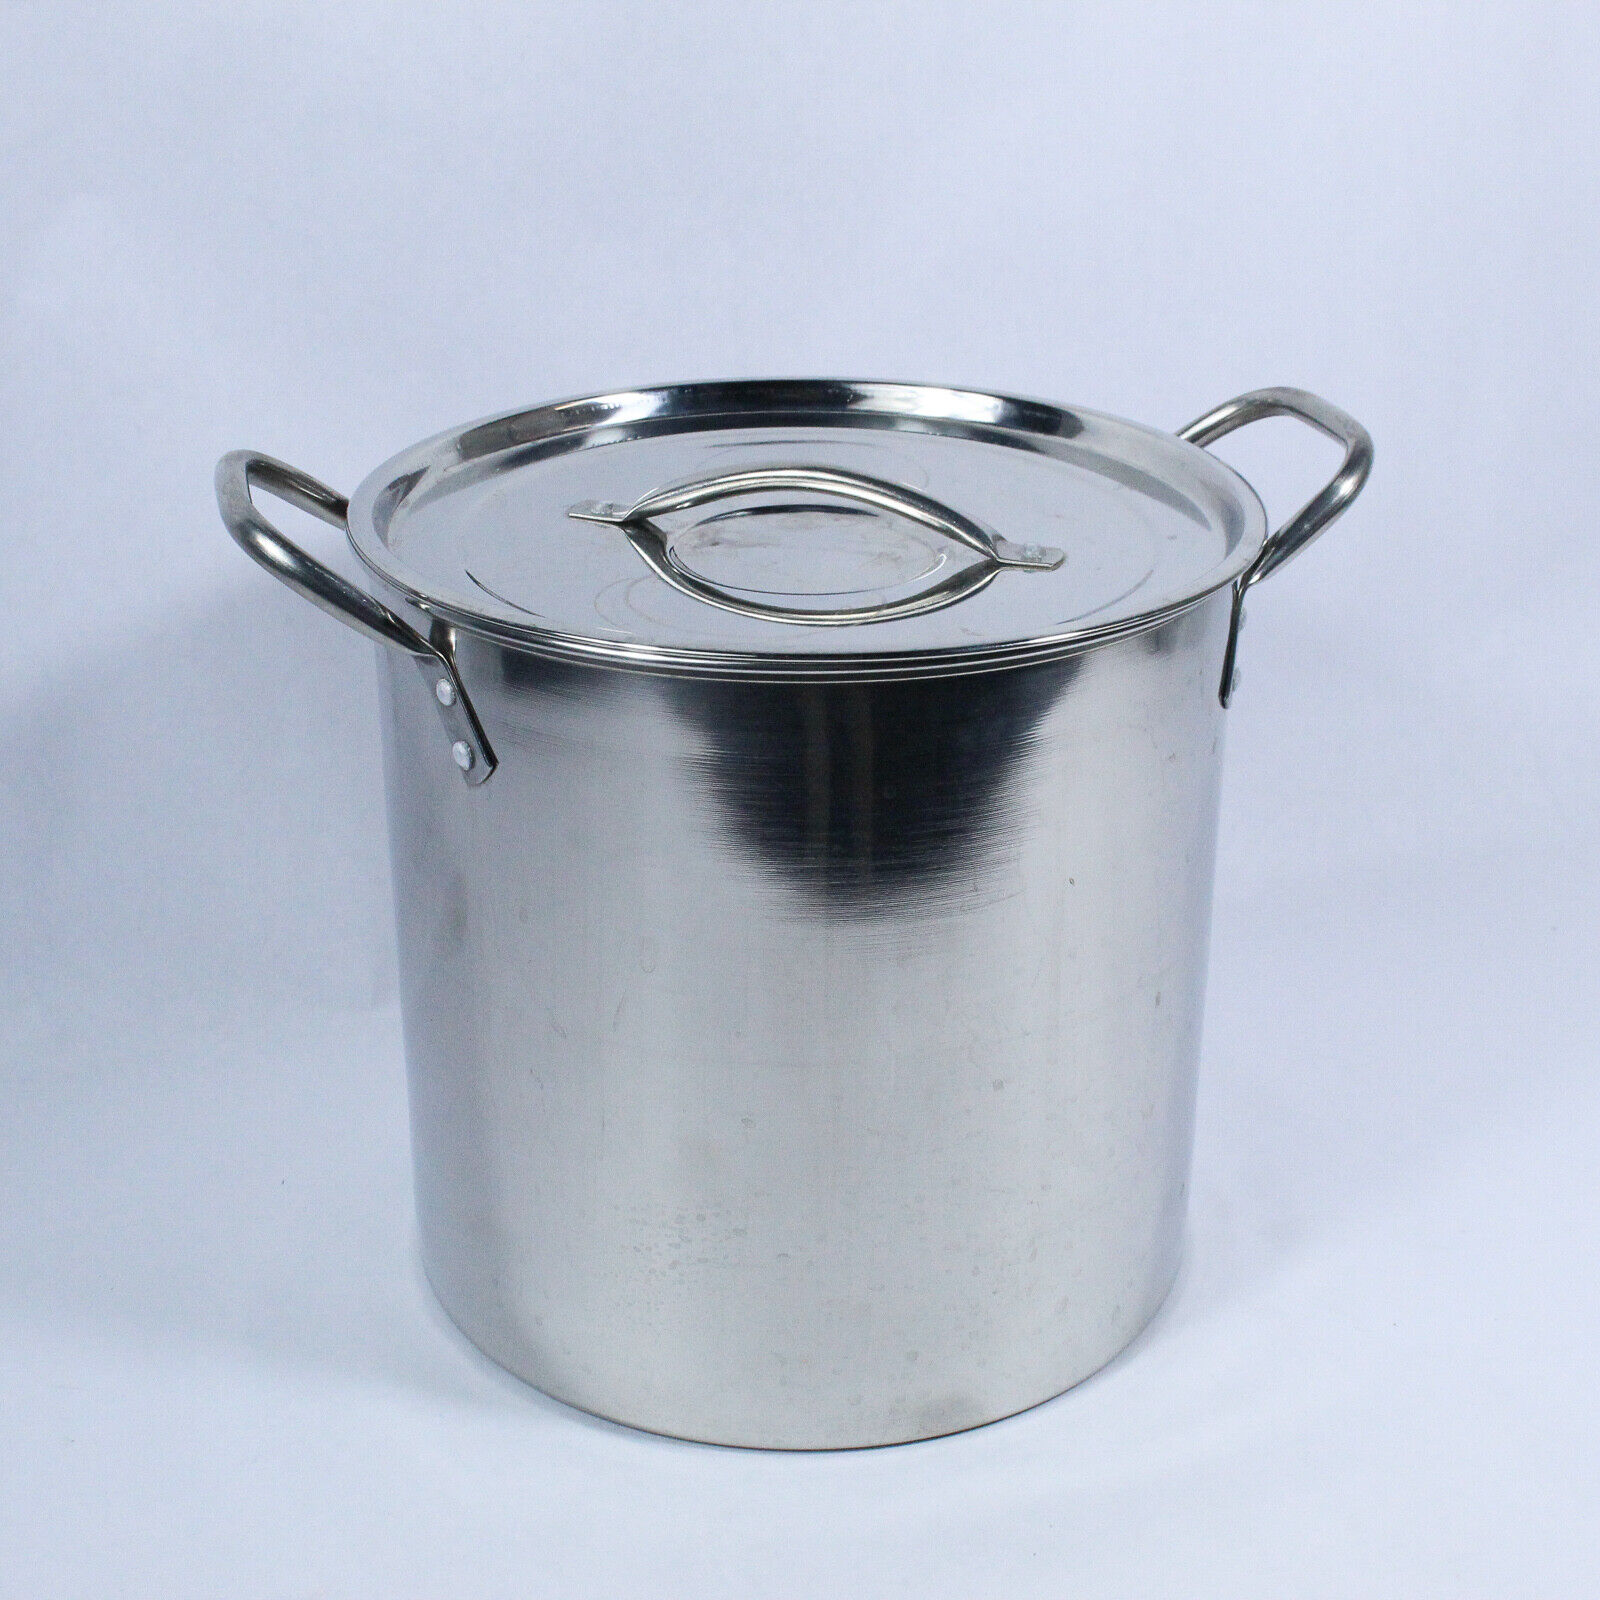 Vintage Stockpot With Lid Handles Silver Toned 9.75 Inches Tall Kitchen